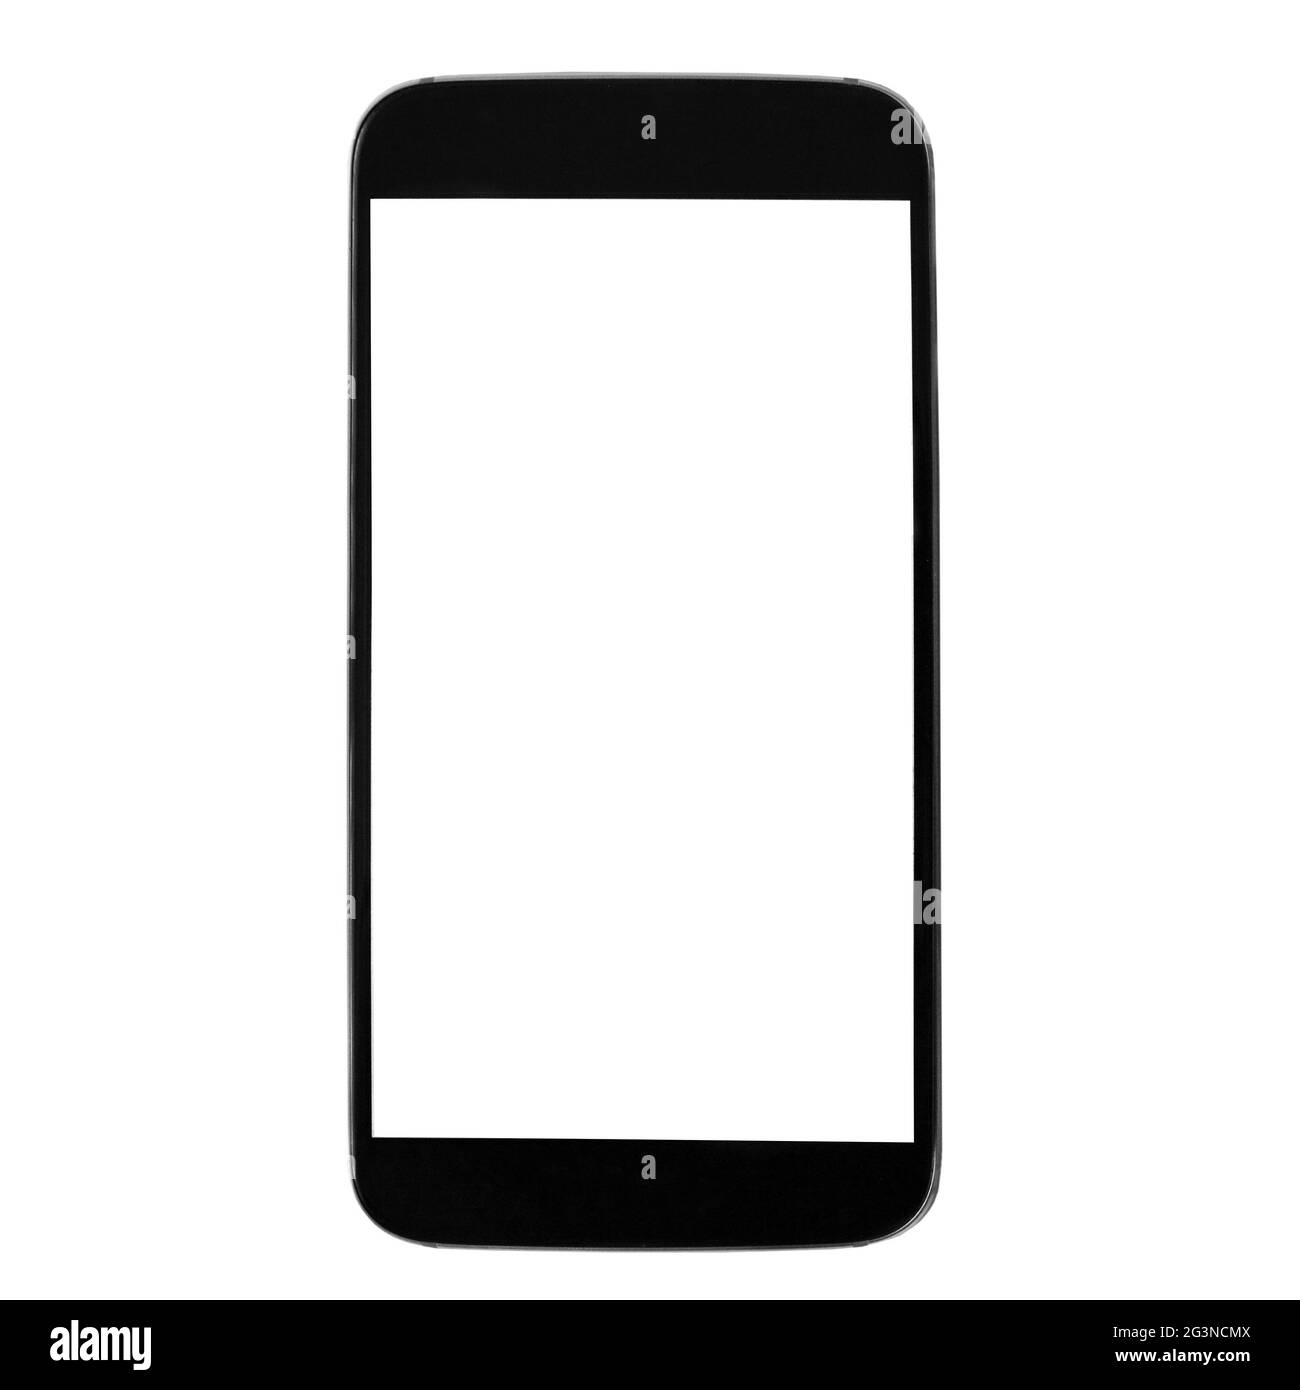 Smartphone with blank screen isolated on white background Stock Photo